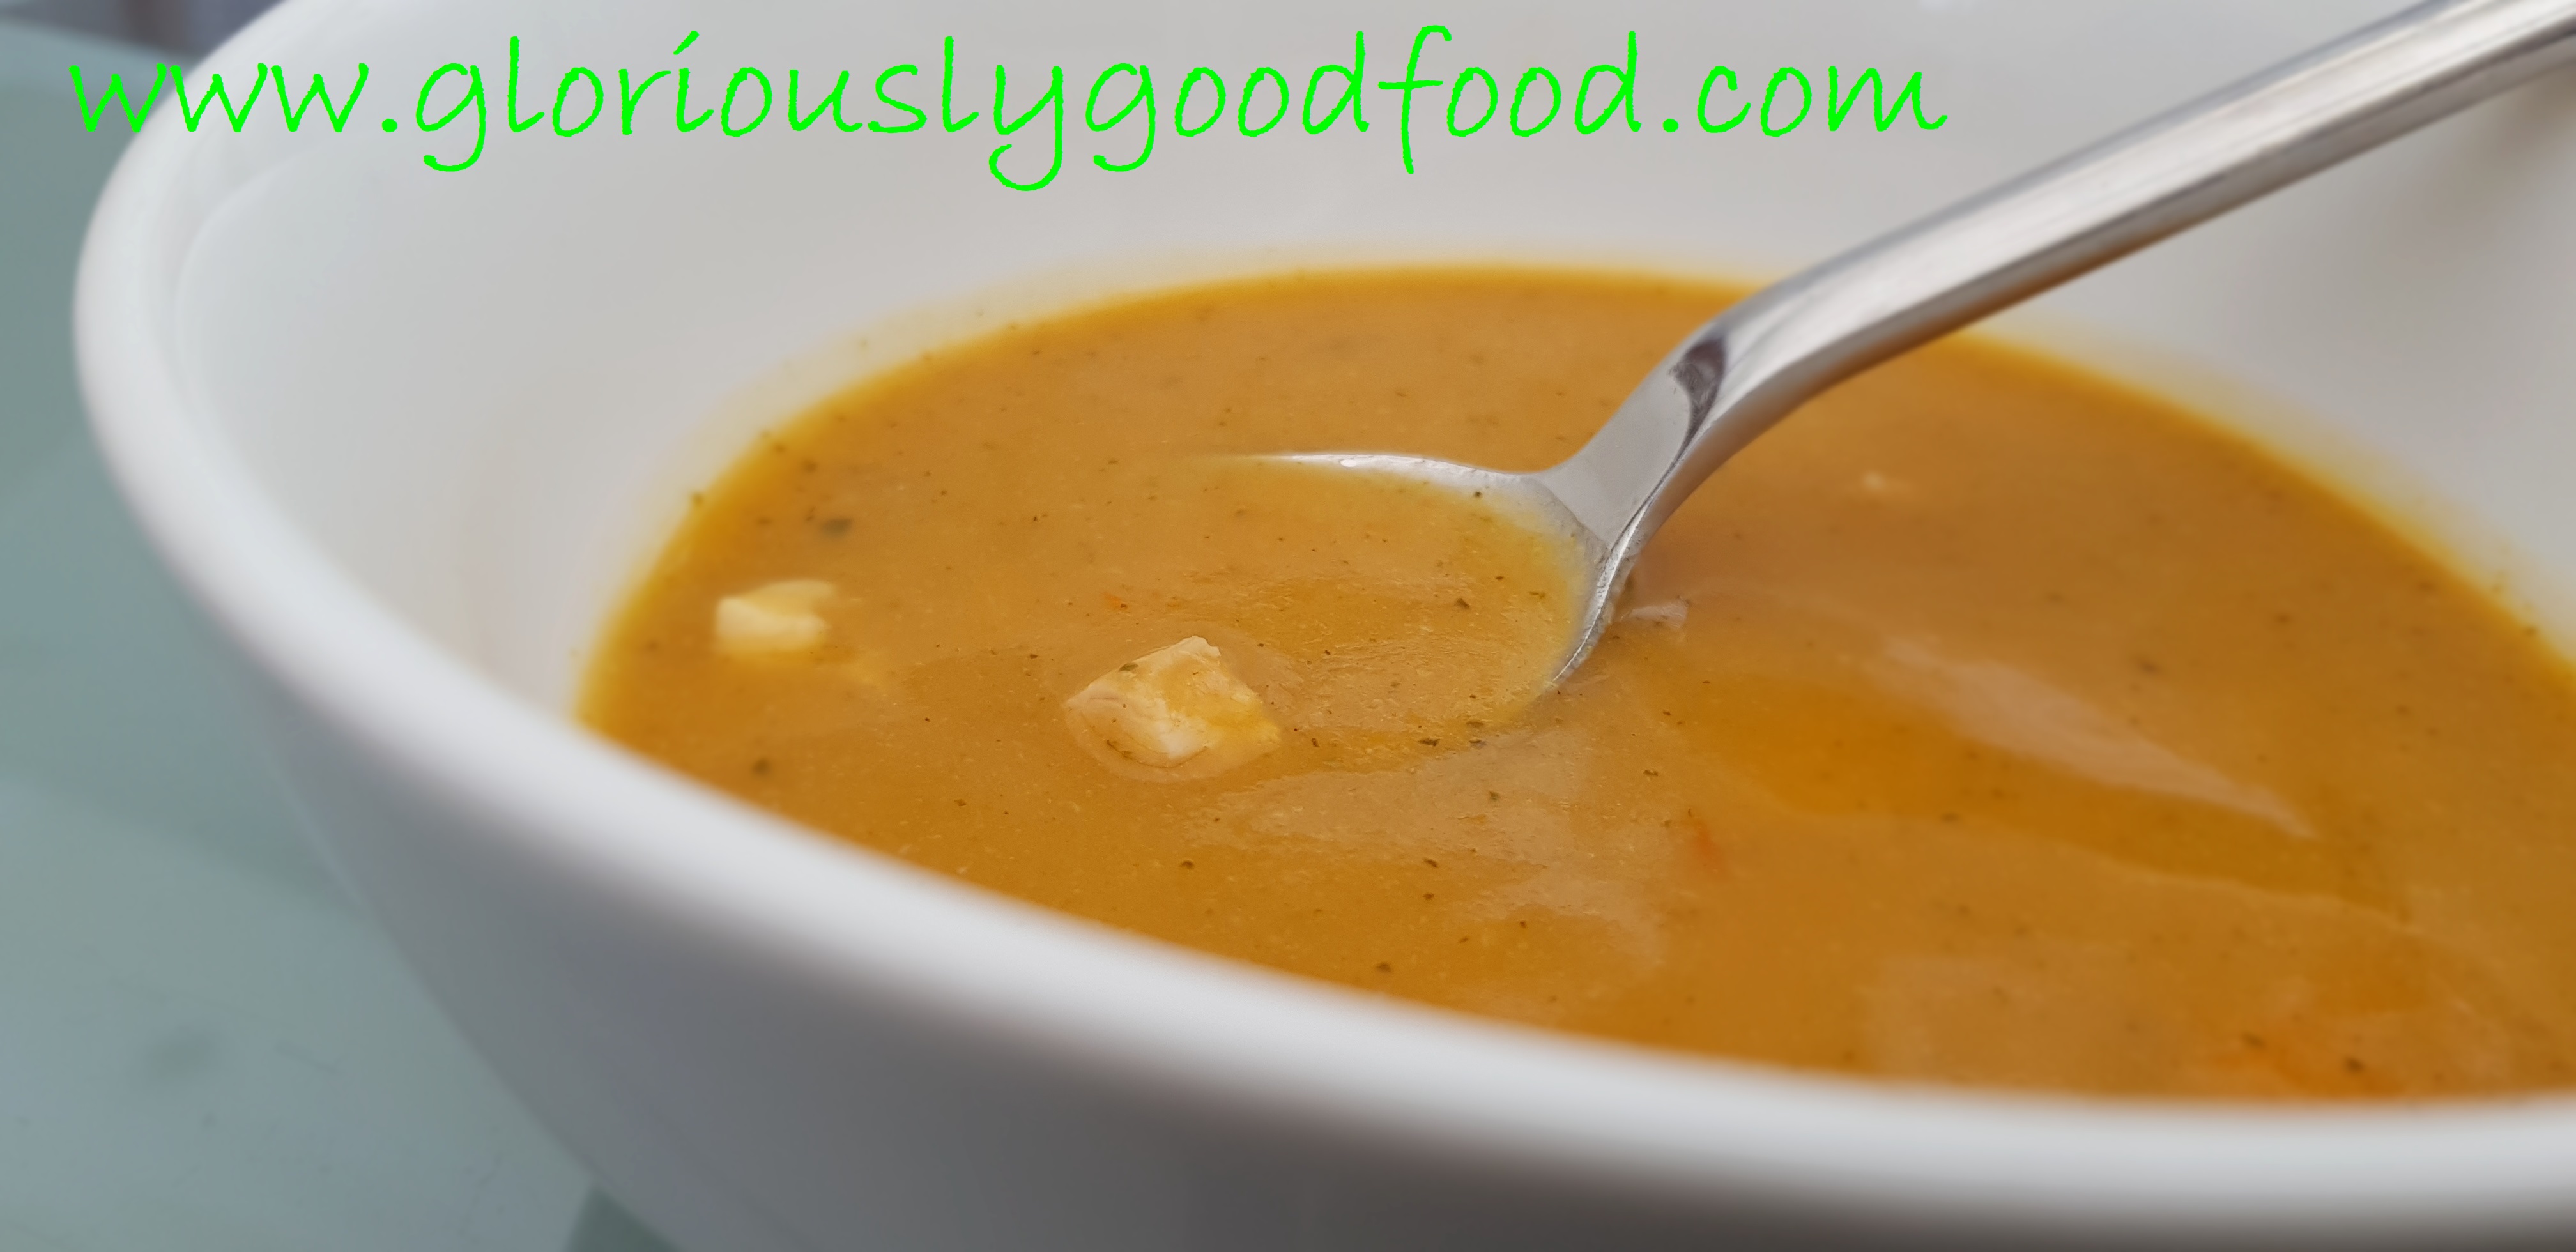 Hearty vegetable soup with tomatoes and chicken - gloriouslygoodfood.com